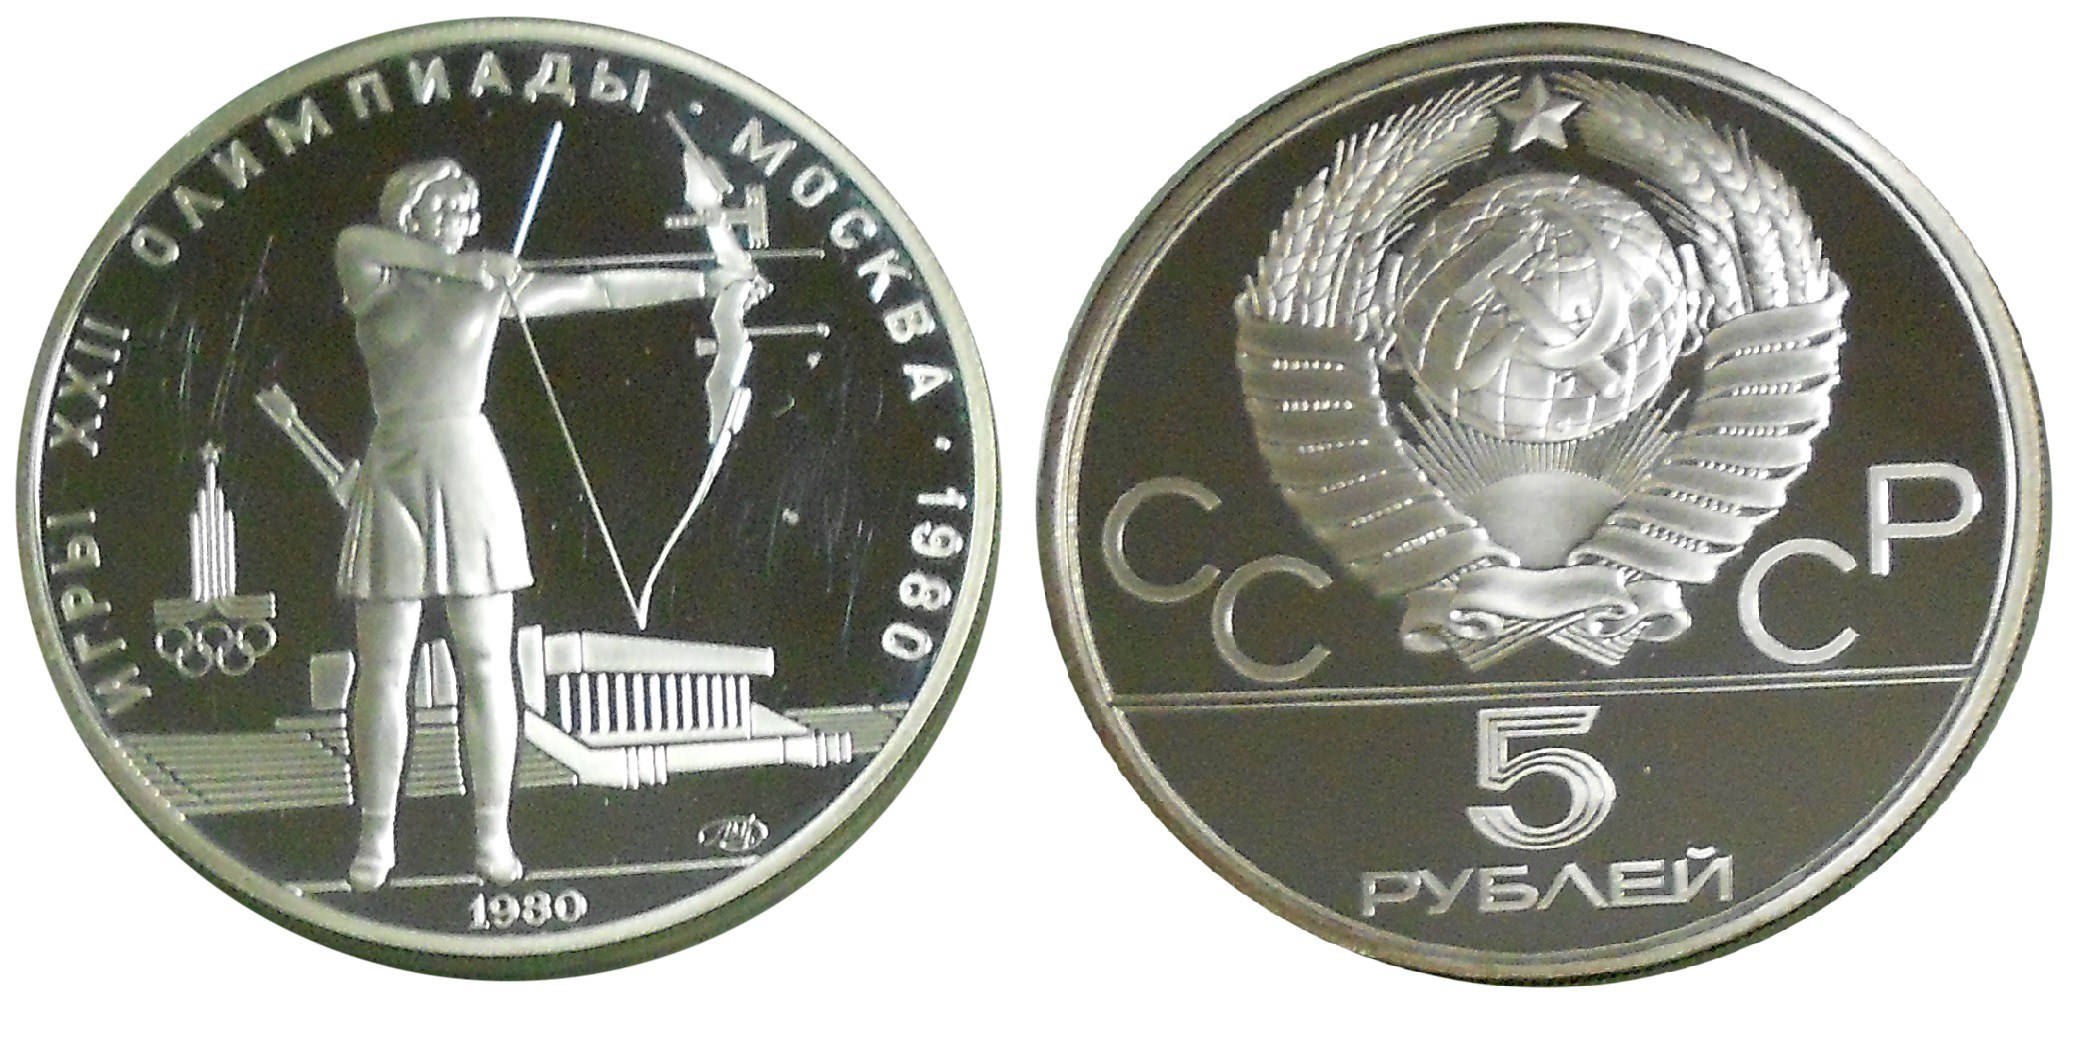 Soviet and Russian Silver Coins | Gold IRA Guide